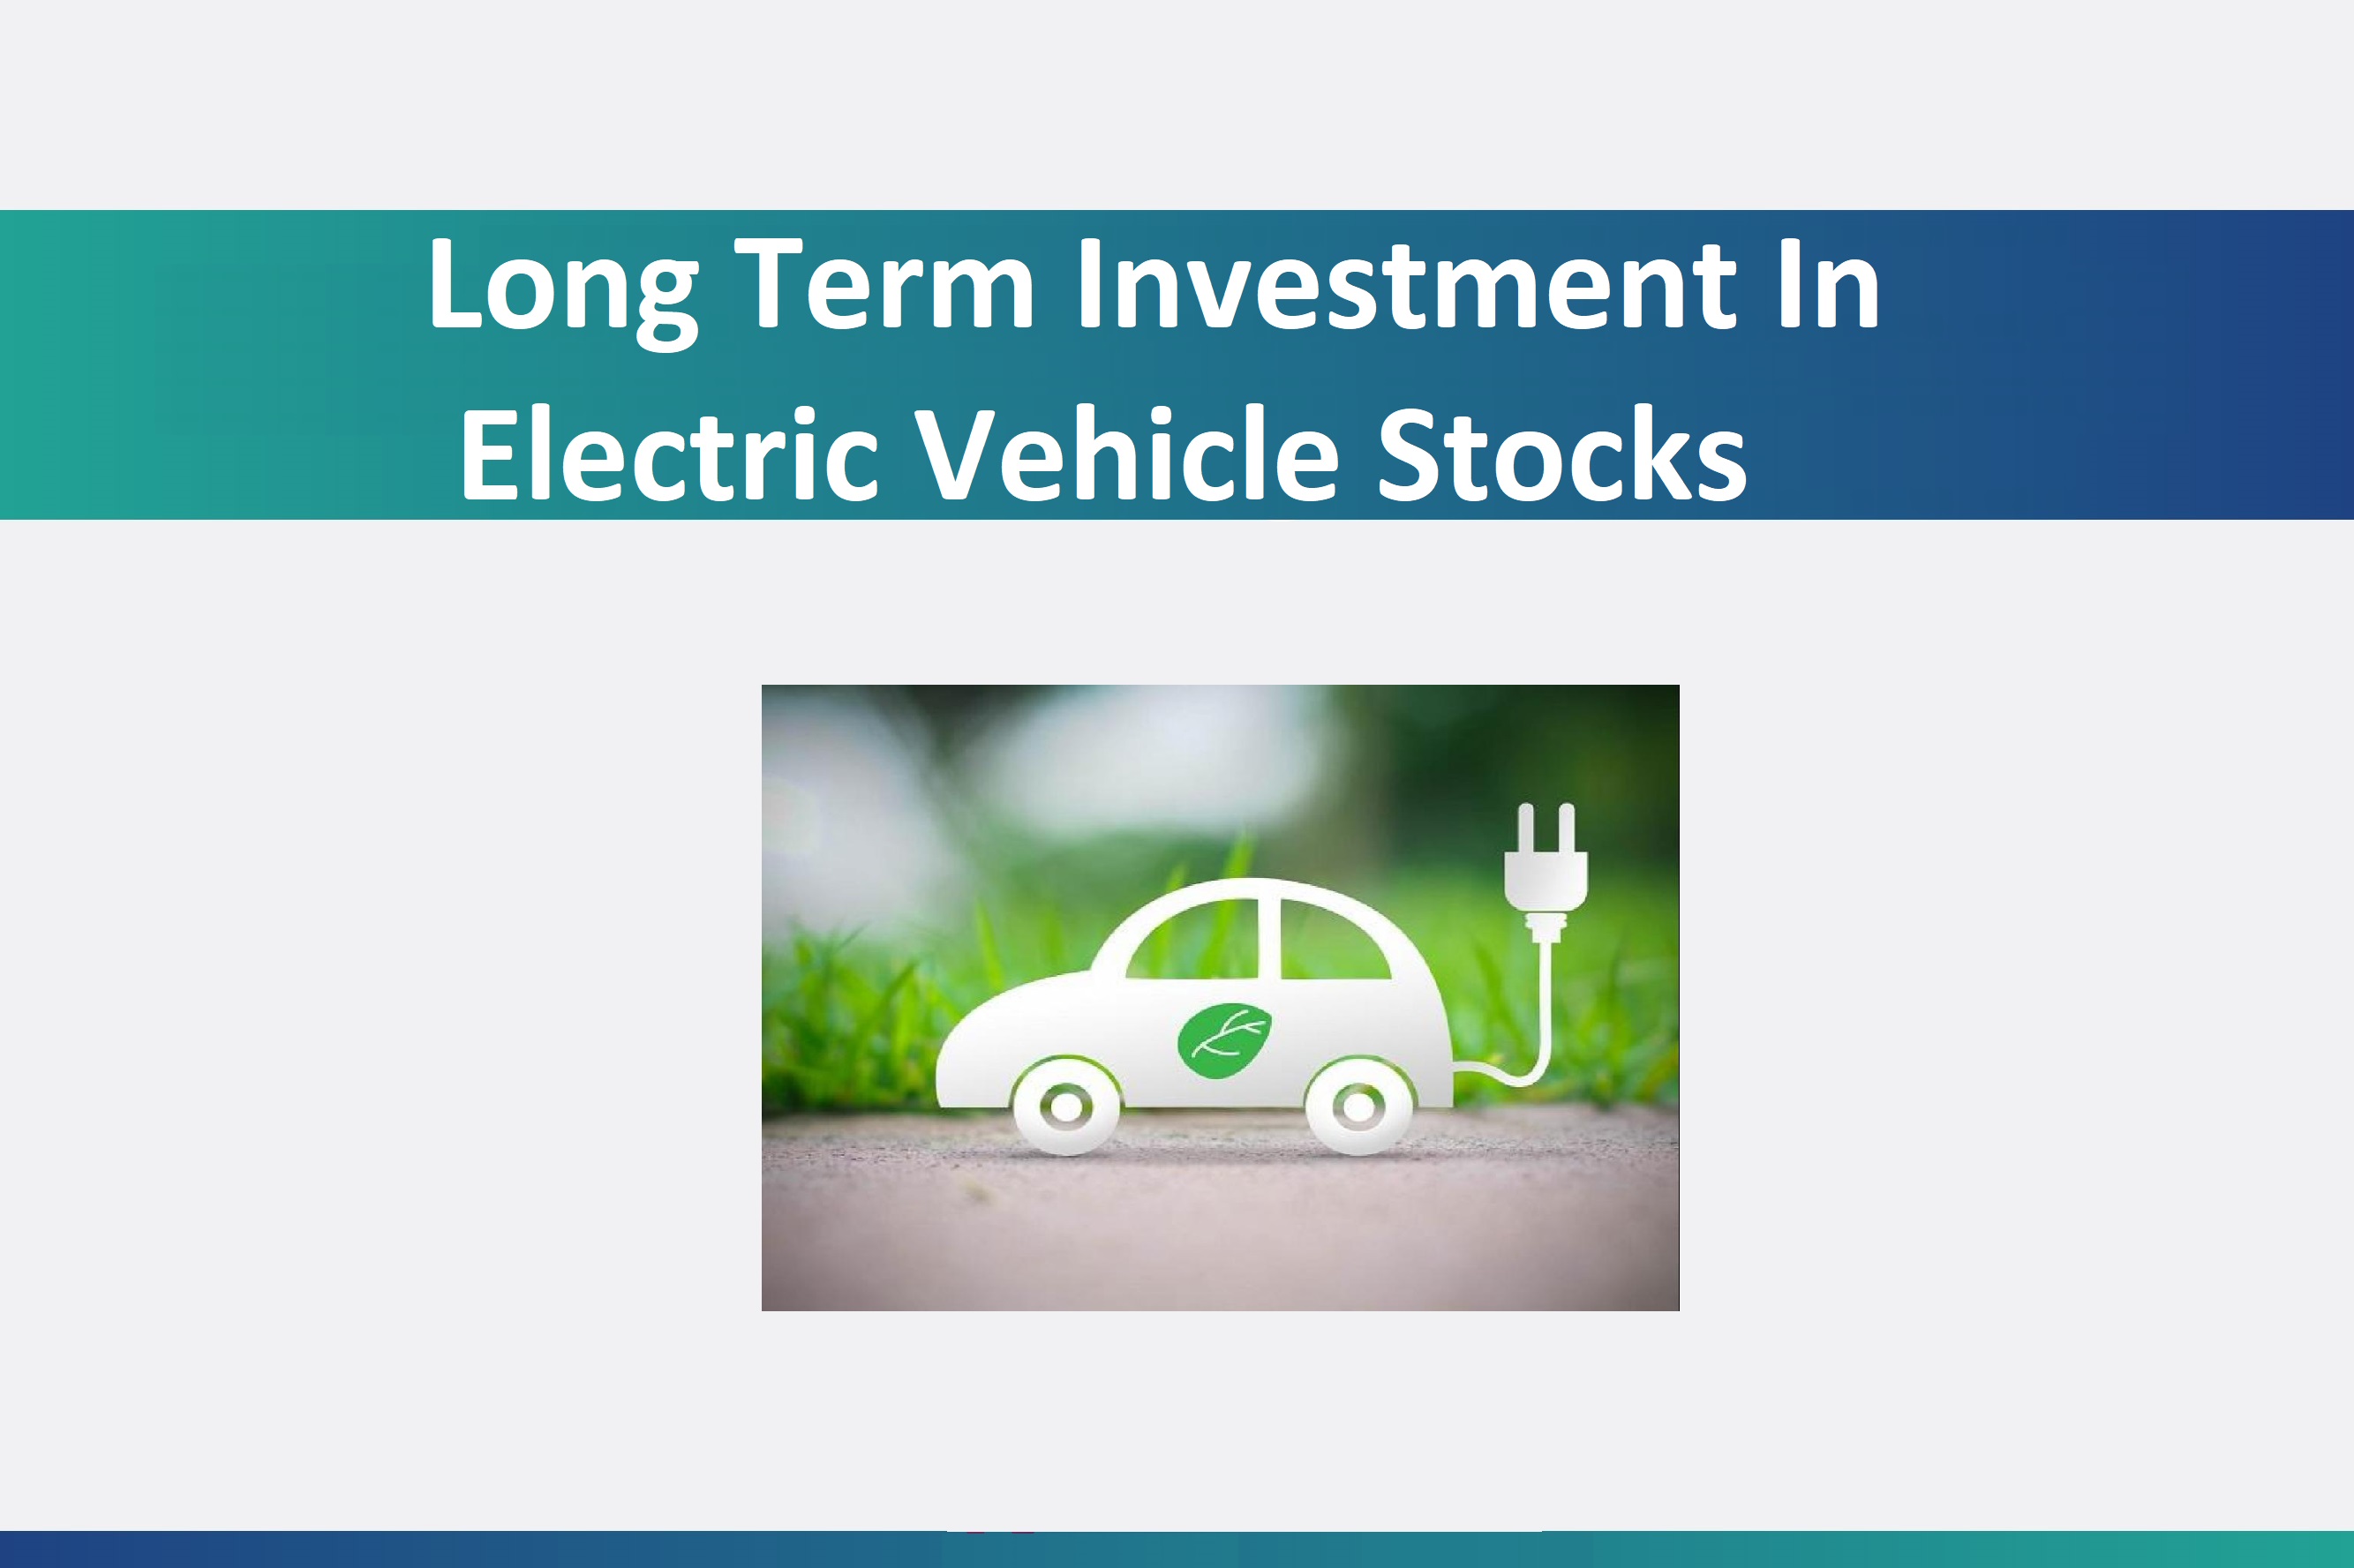 Long Term Investment in Electric Vehicle Stocks